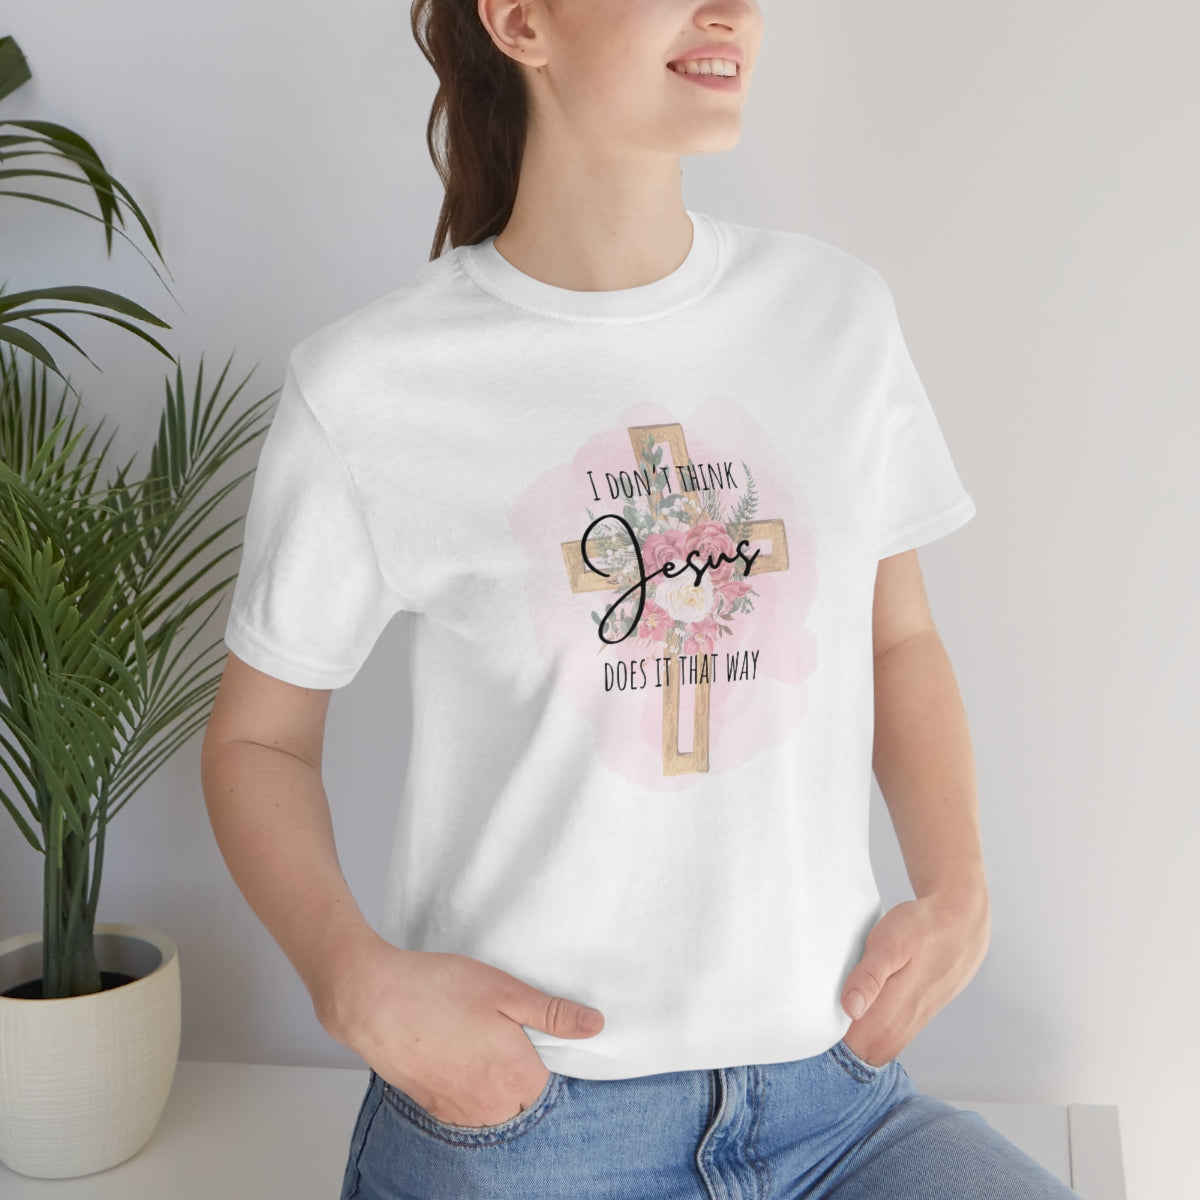 I do not think Jesus does it that way pink watercolor Bella Canvas Jersey Short Sleeve Tee